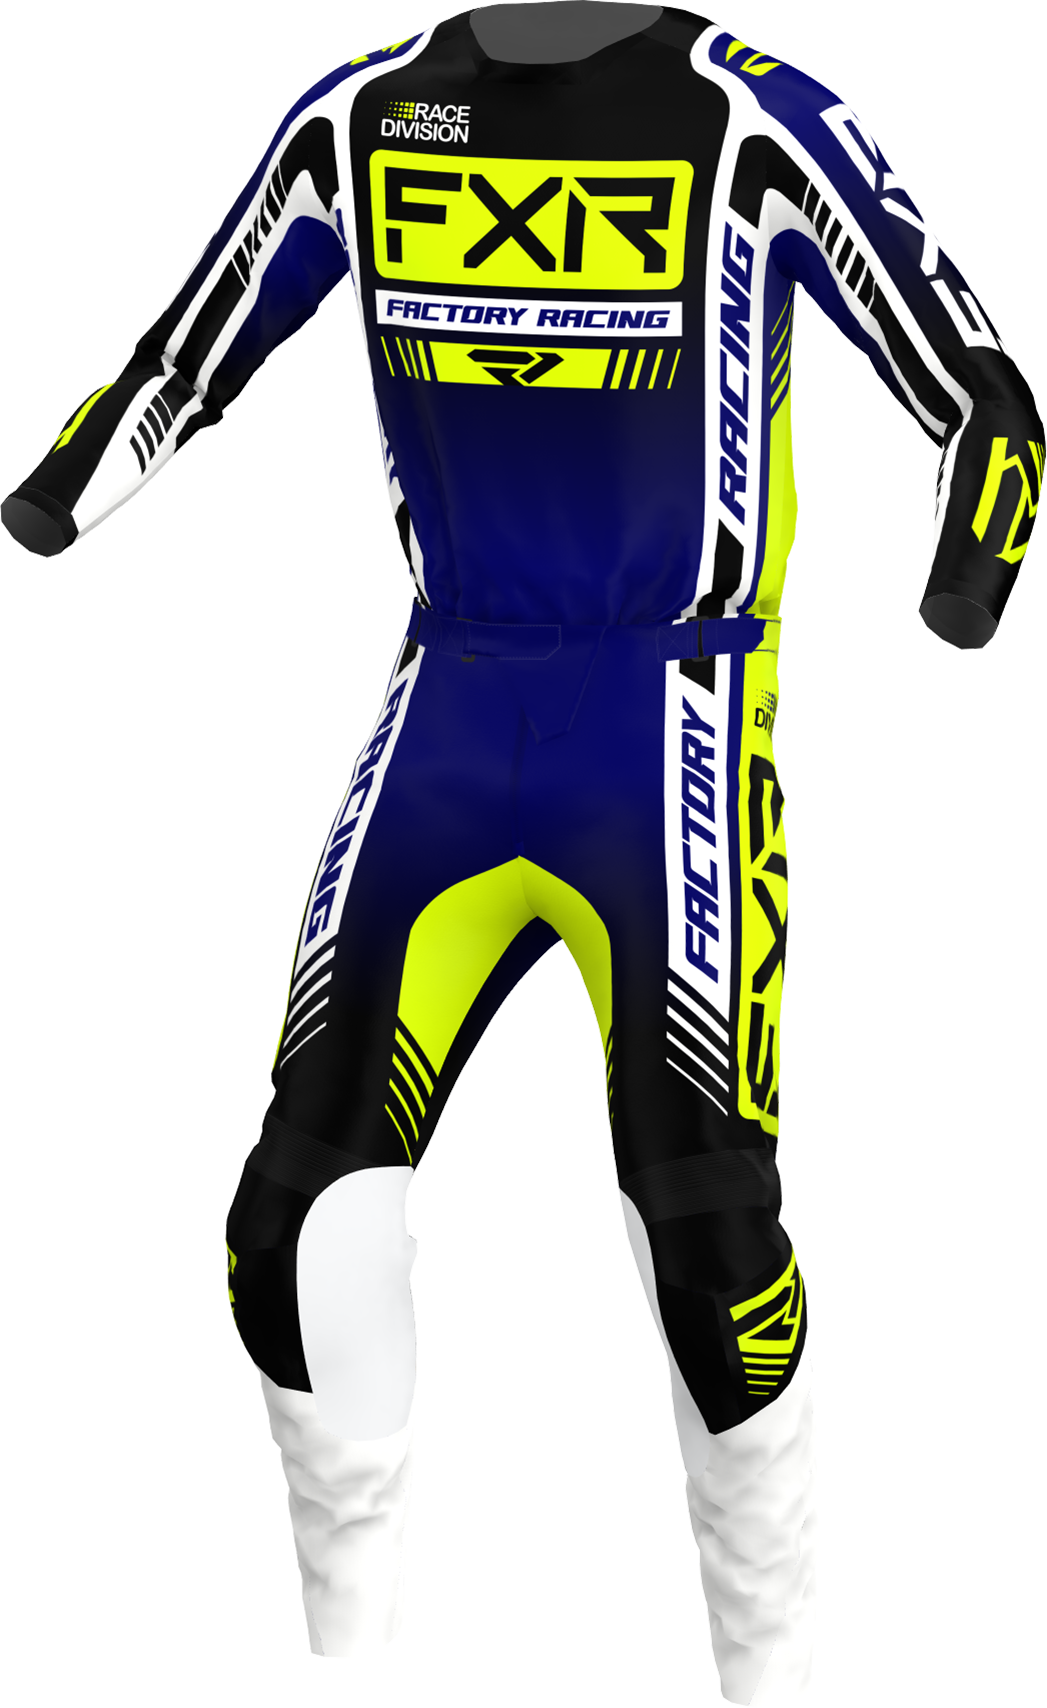 A 3D image of FXR's Clutch Pro MX Jersey and Pant in Midnight/Hi-Vis/White colorway